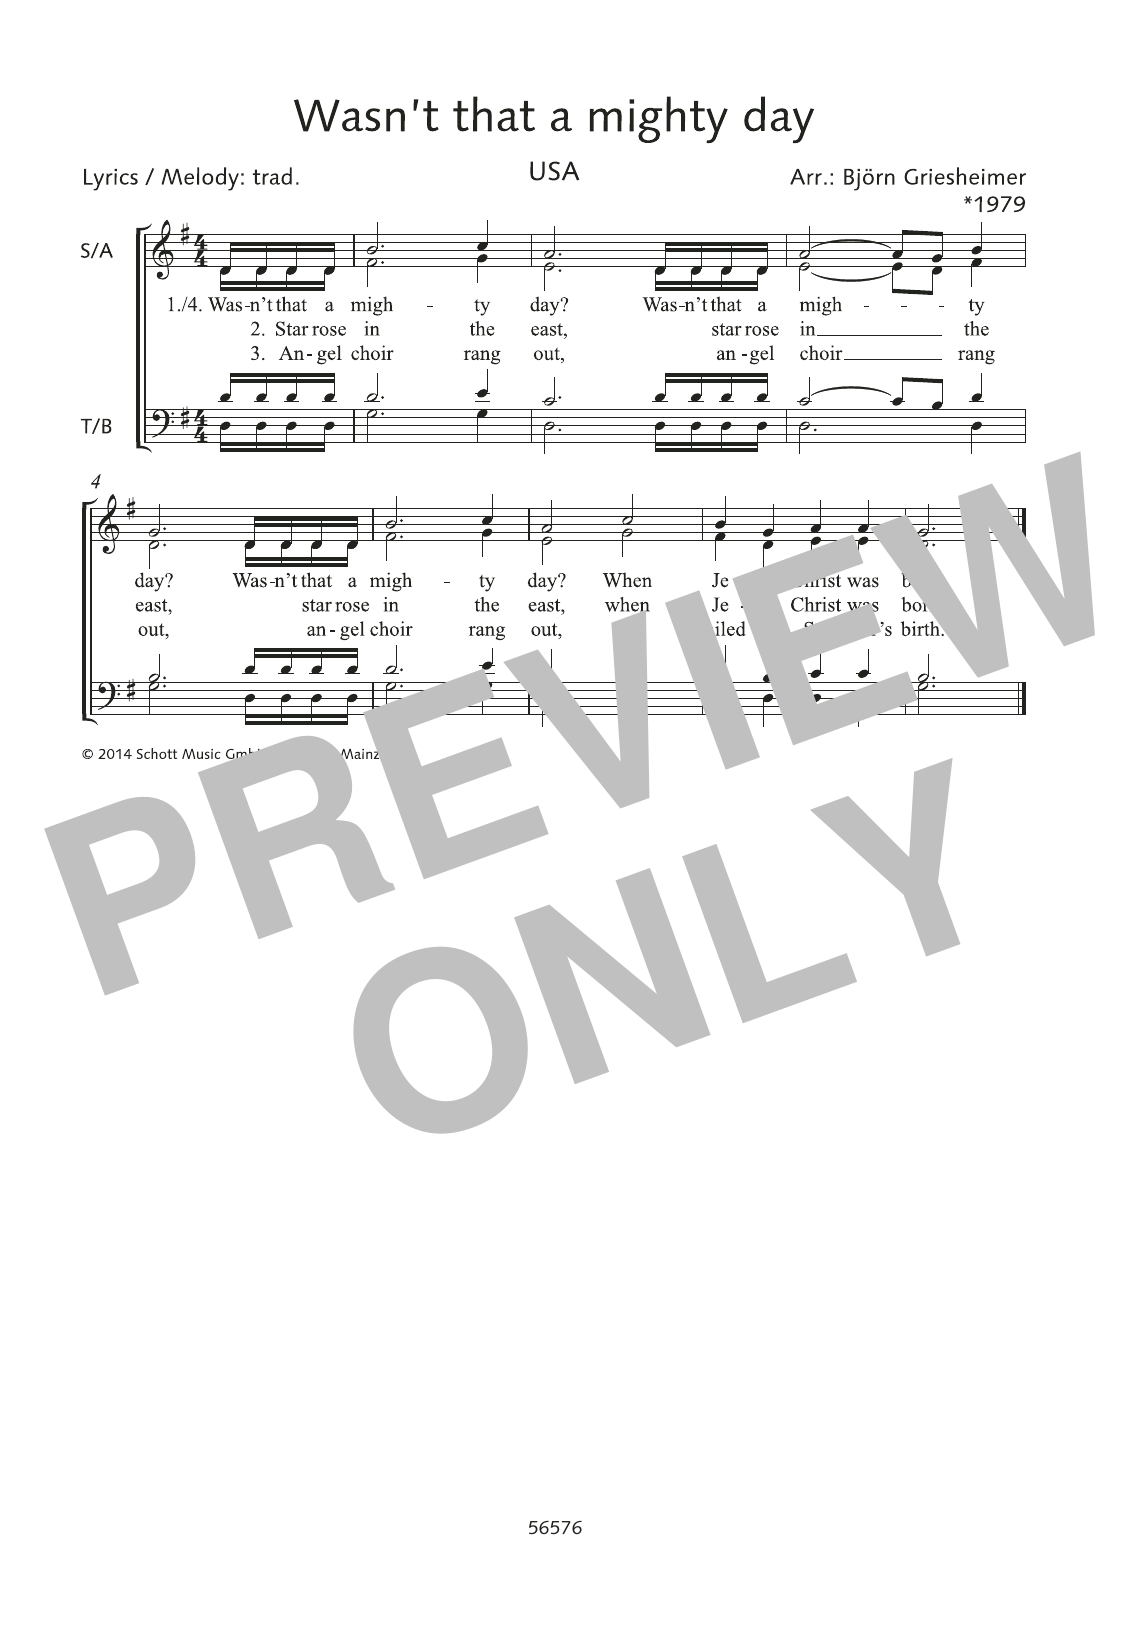 Download Björn Griesheimer Wasn't that a mighty day Sheet Music